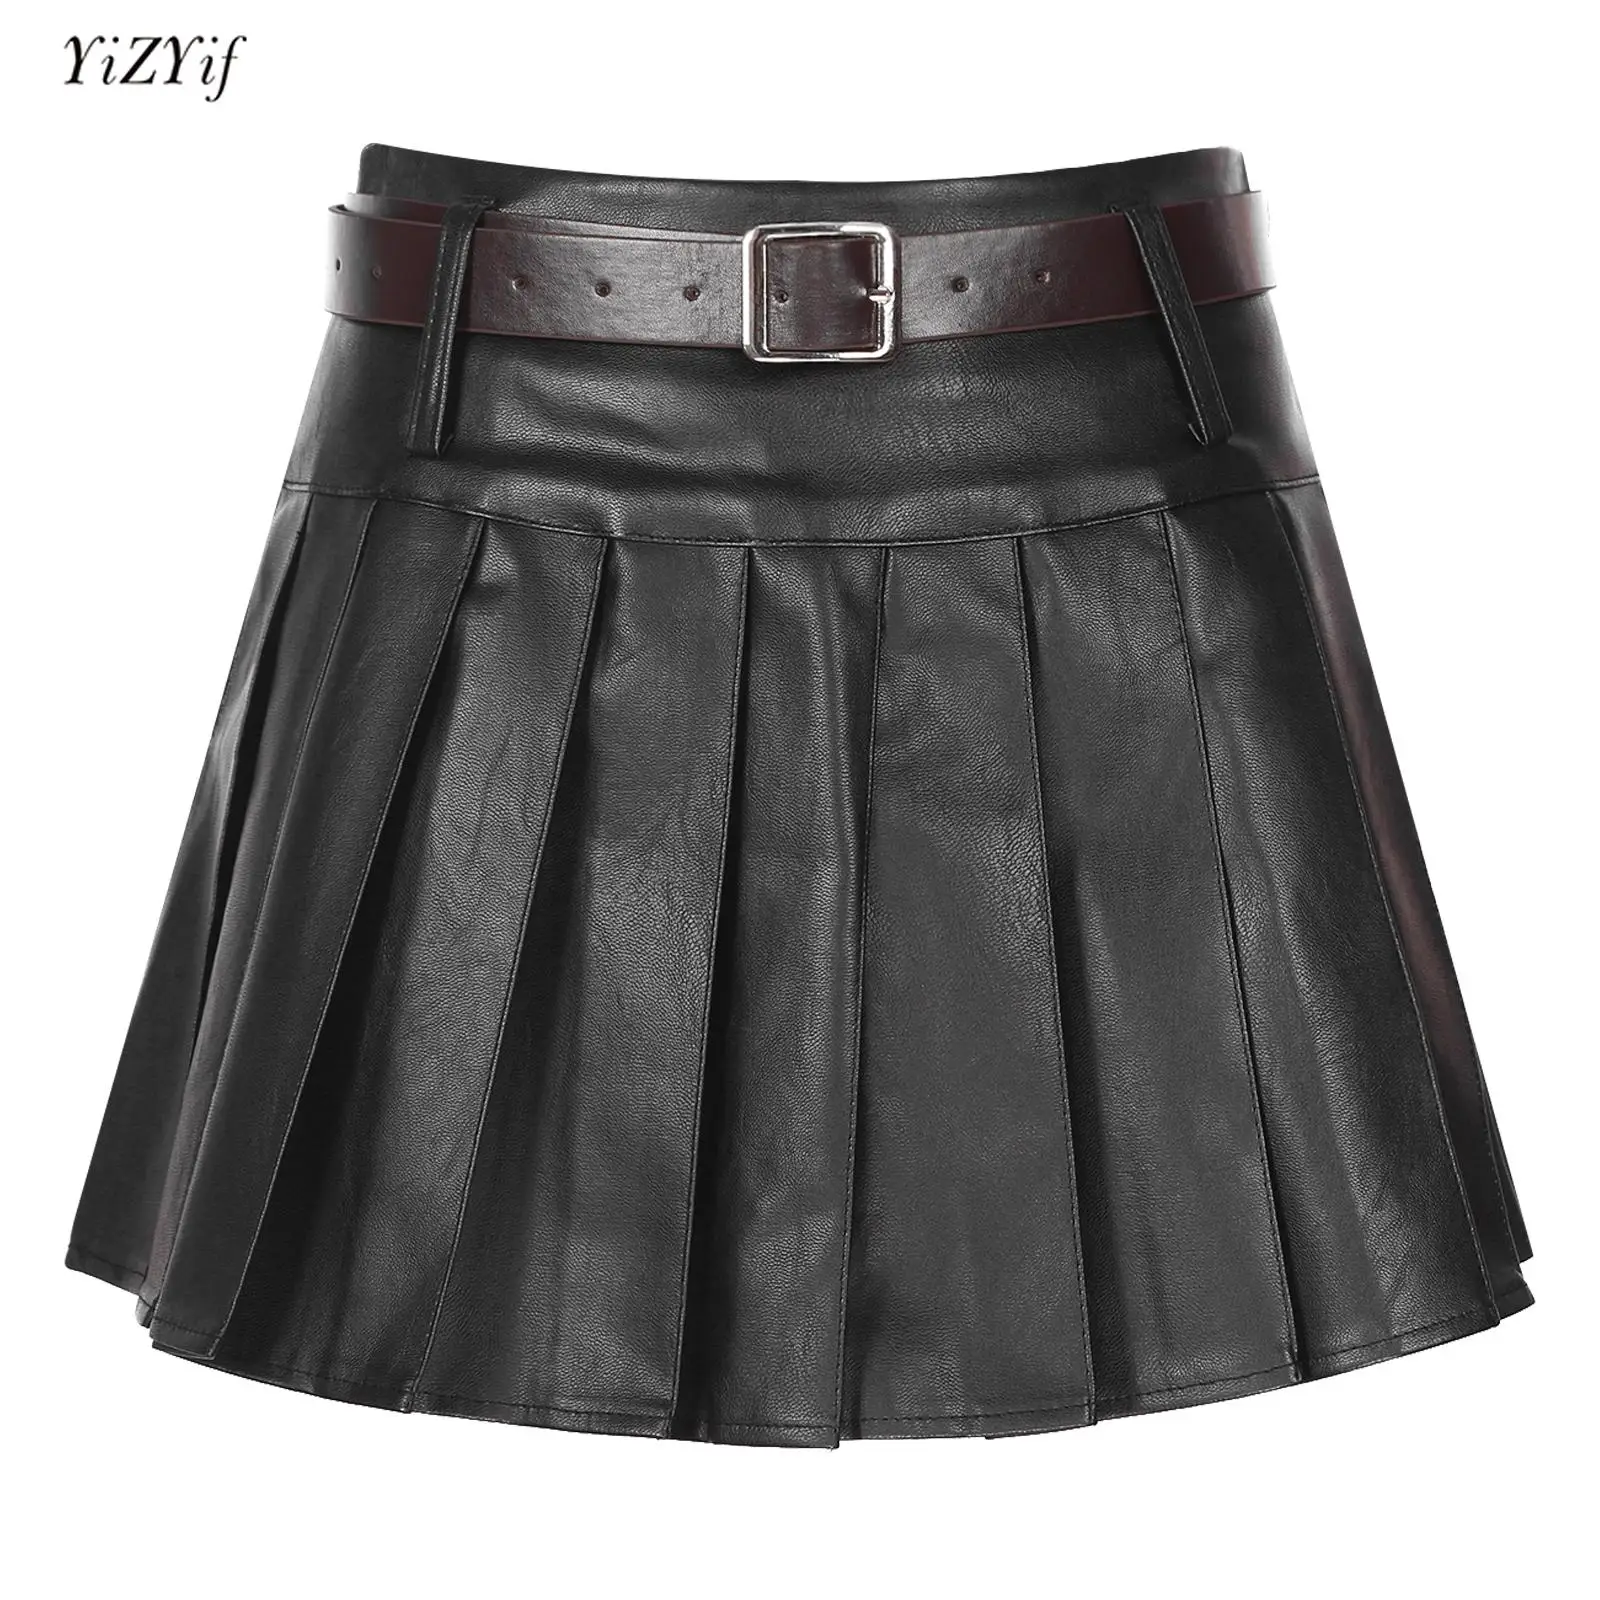 Womens Faux Leather Pleated Skirt Fashion Clubwear High Waist Built-in Shorts Skirts with Adjustable Belt Party Street Dancewear motion sensor solar light ip65 waterproof cob solar wall lamp outdoor garden lighting with remote control street lights